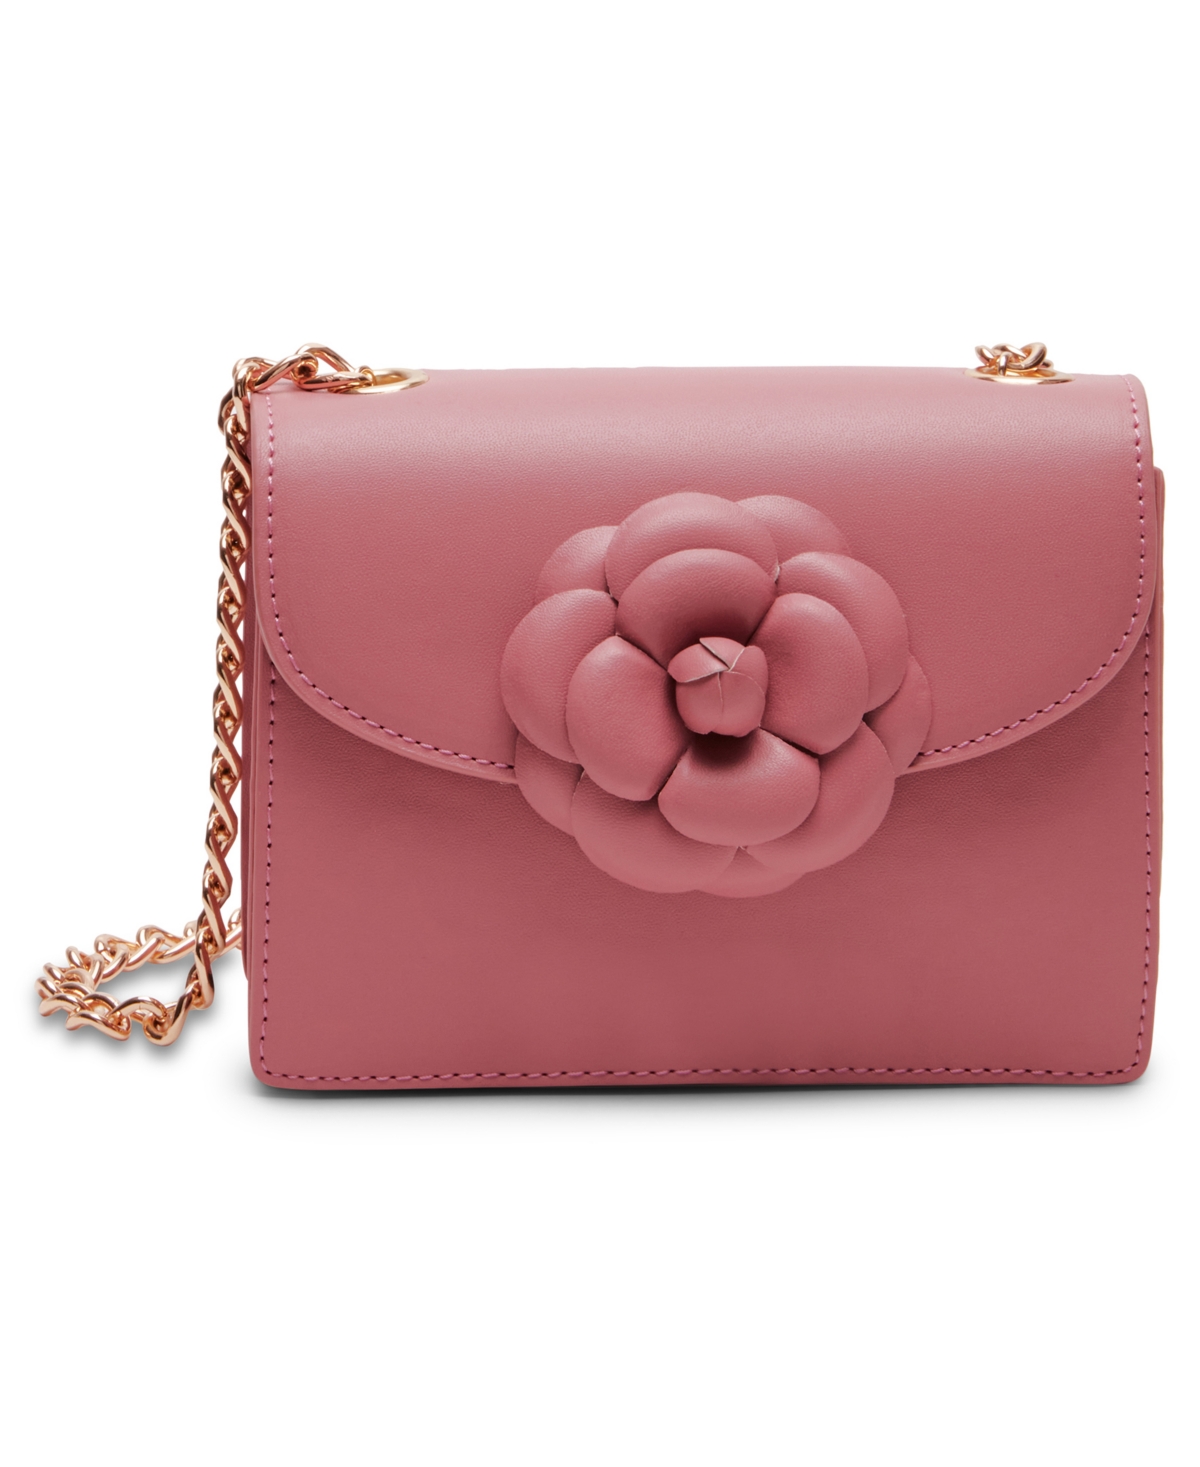 Anne Klein Square Flap With Floral Applique Crossbody In Pink